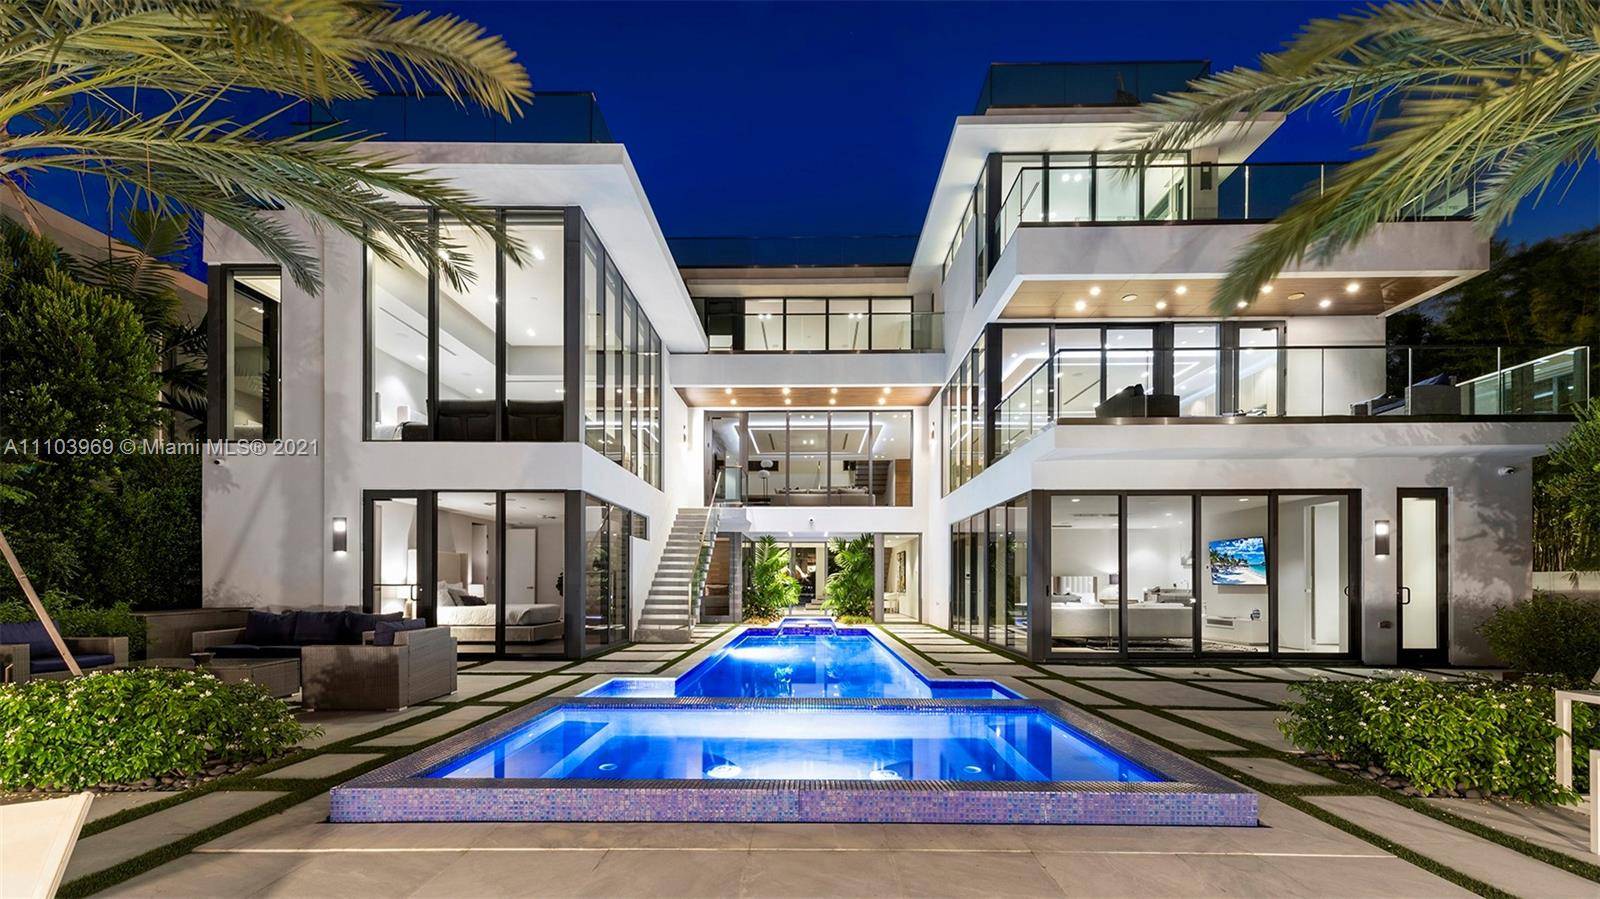 This Ultra Modern three story residence w rooftop solarium is just steps off Las Ola's and a 2 minute walk from all the Fabulous Restaurants and shops.